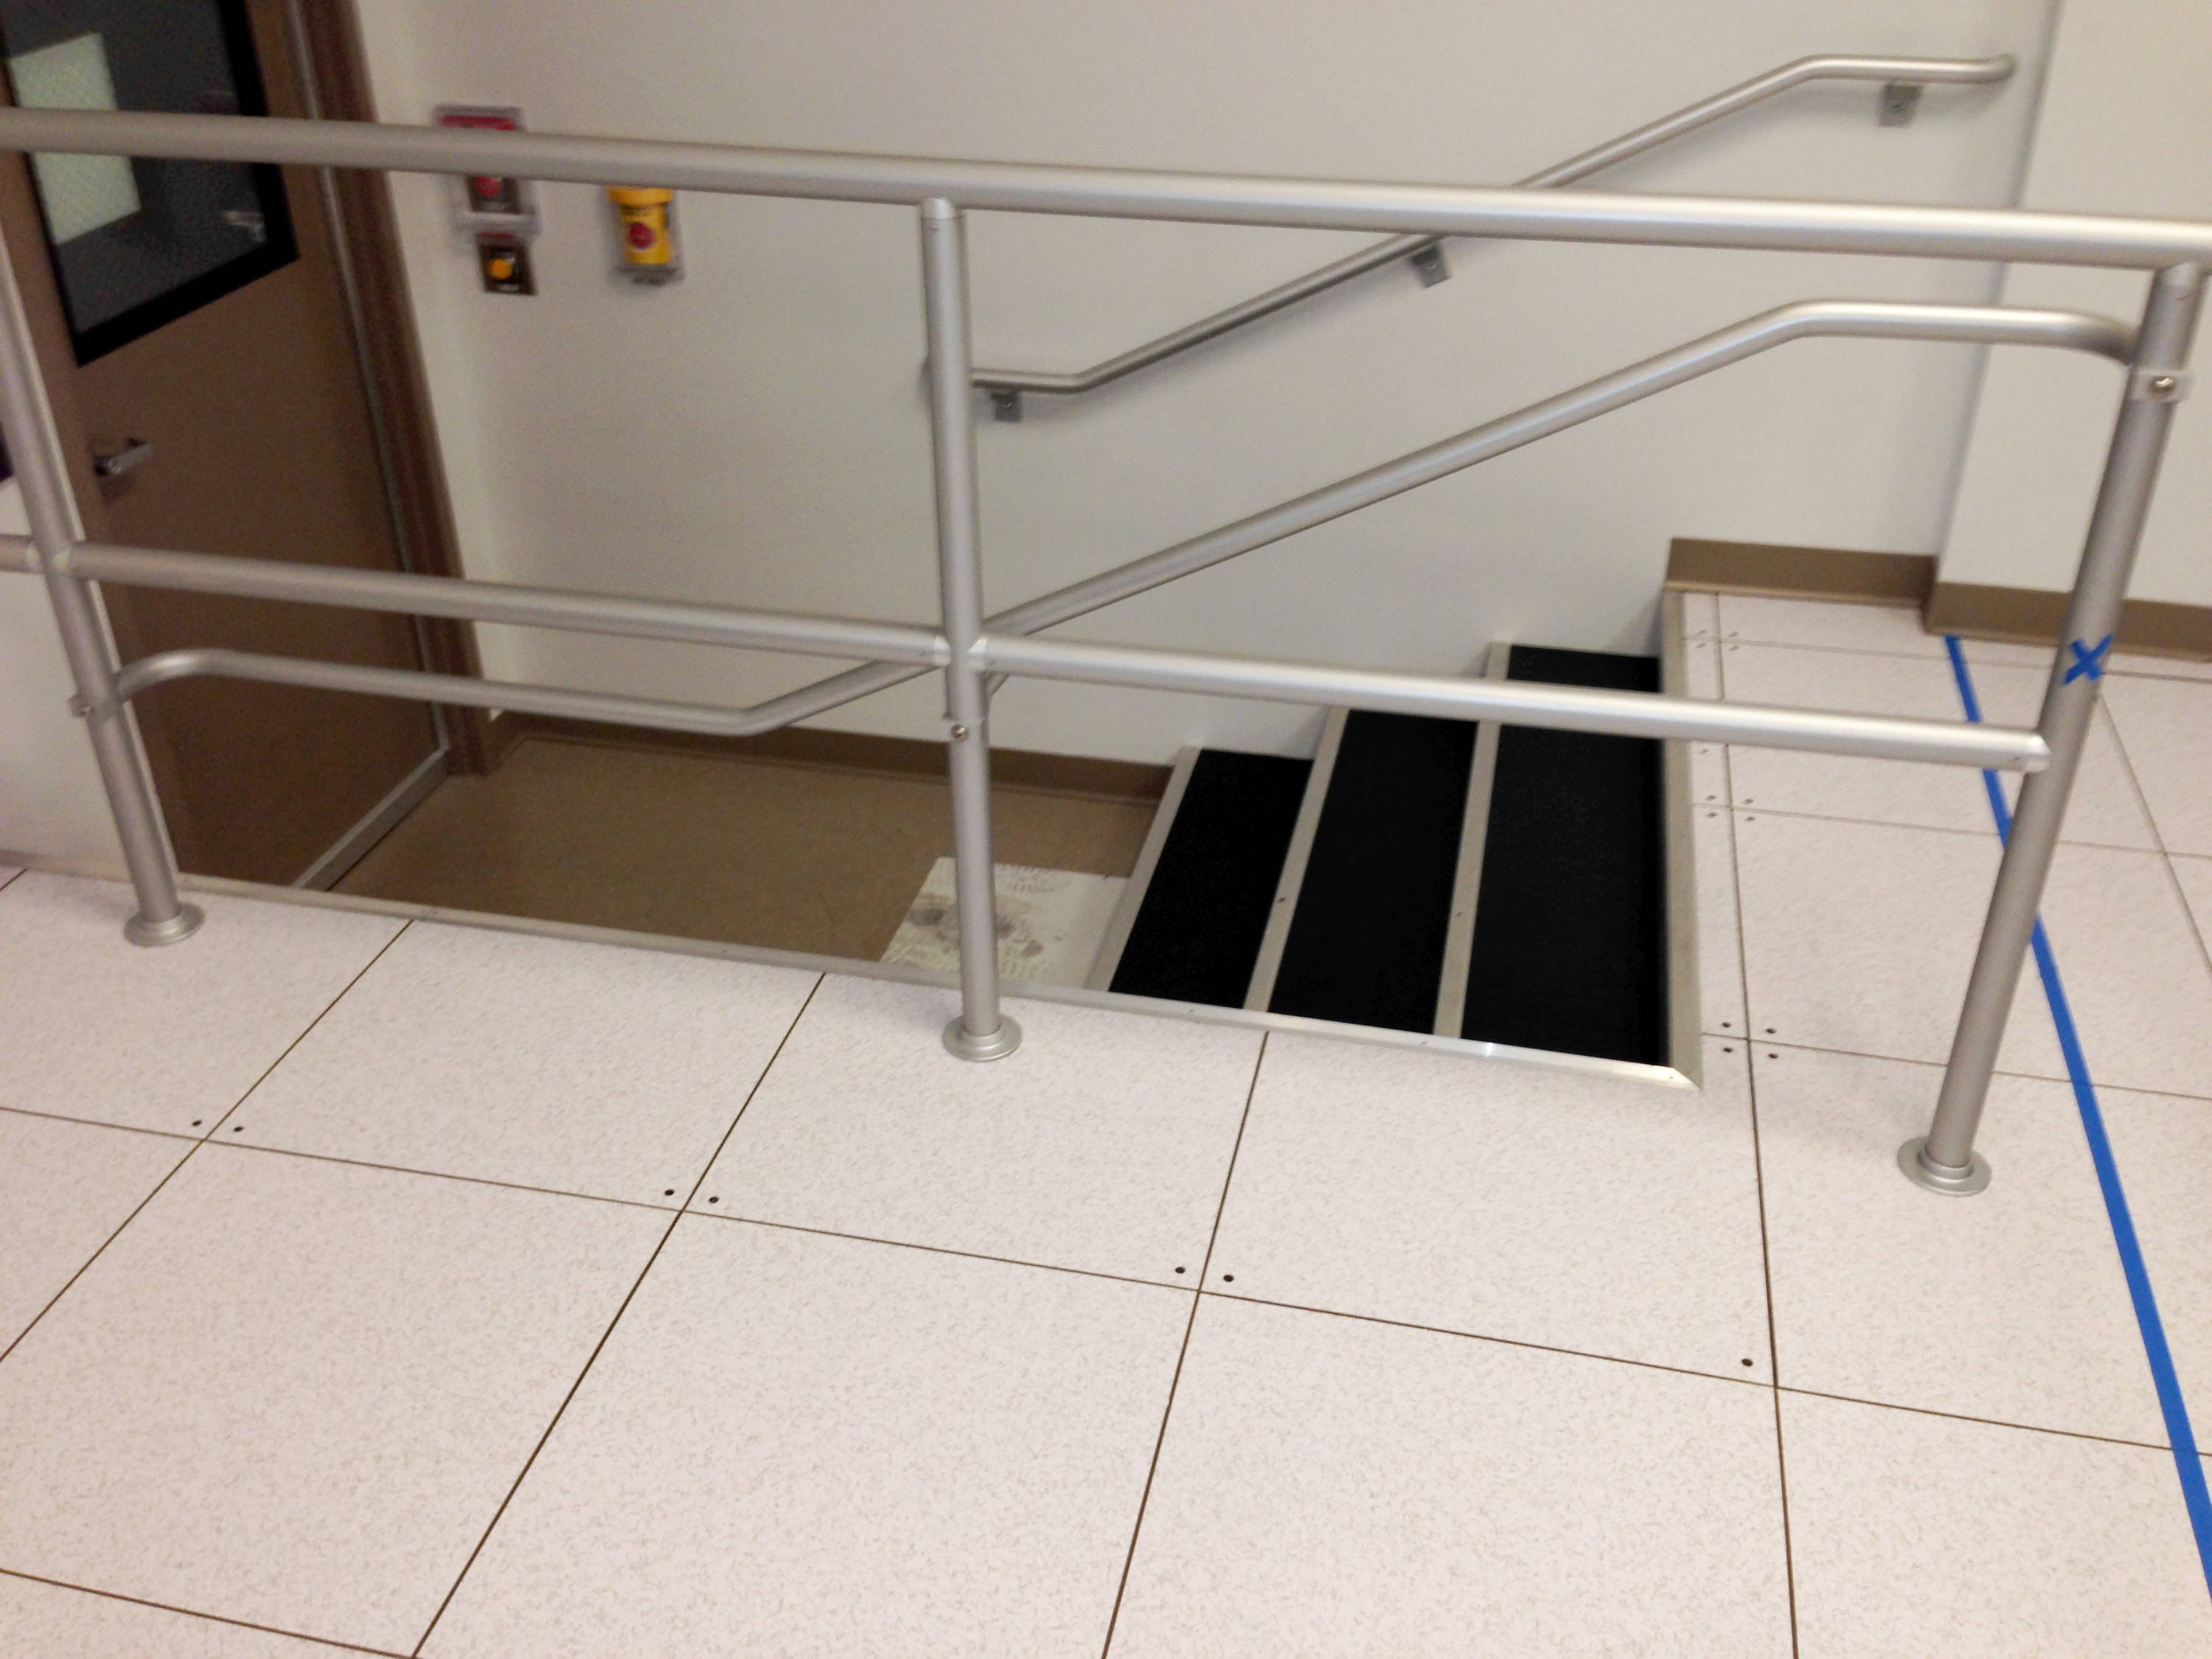 Tate Access Floor panels can be adapted to many space requirements, along ledges and around stairways.